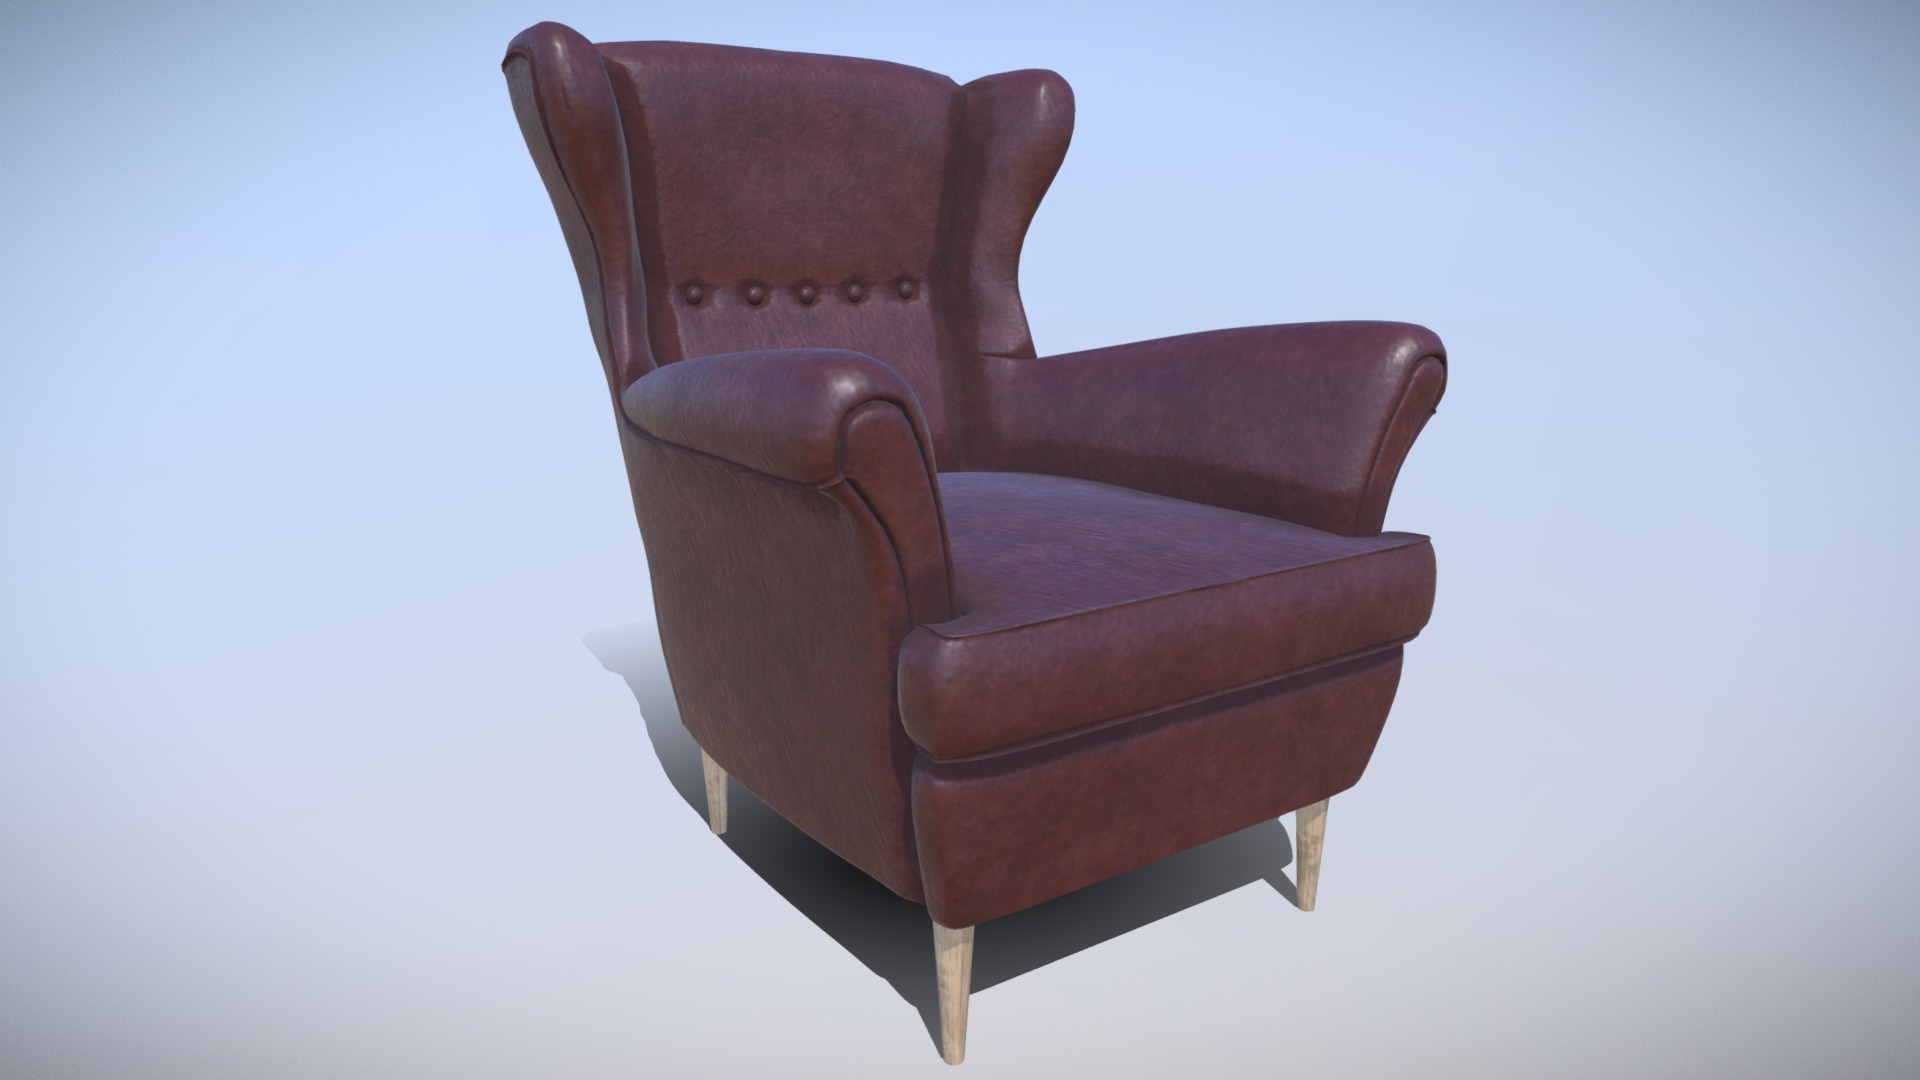 3D model Strandmon Sofa IKEA Low-poly - This is a 3D model of the Strandmon Sofa IKEA Low-poly. The 3D model is about a chair with a cushion.